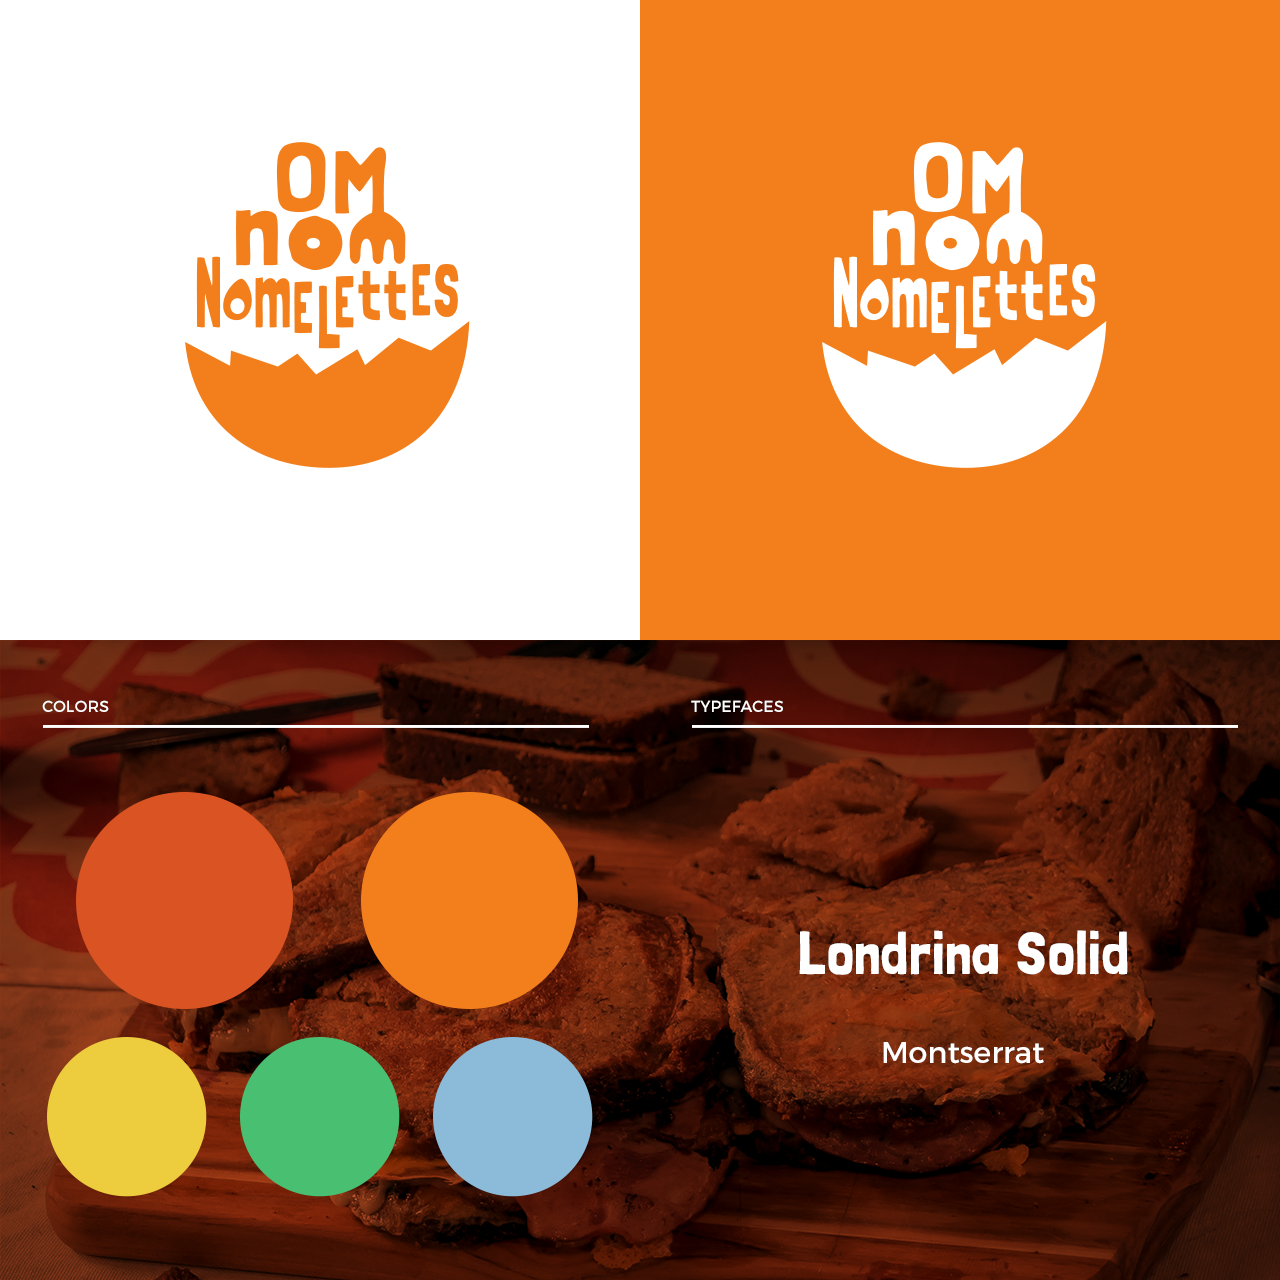 Om Nom Nomelettes branding layout with colors and typefaces